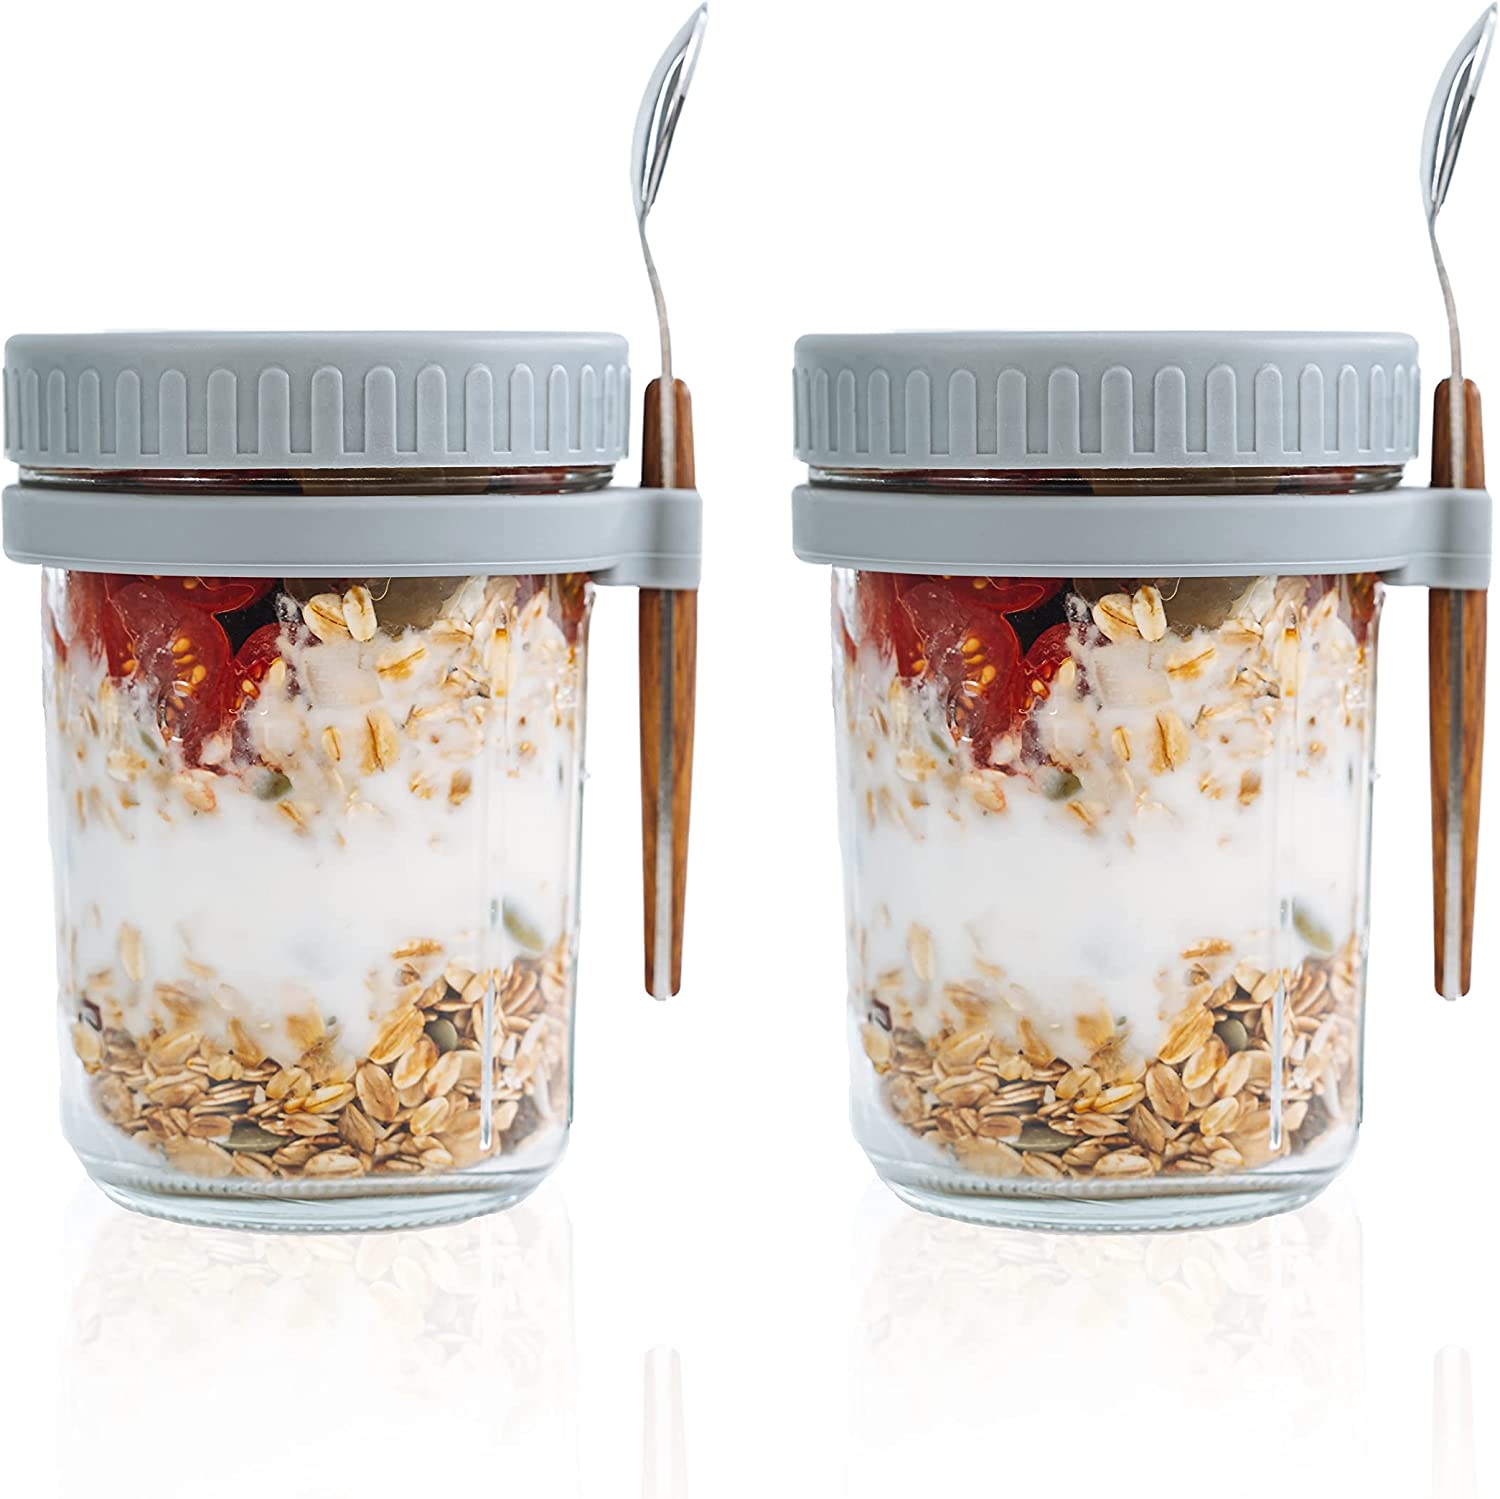 LANDNEOO 4 Pack Overnight Oats Containers with Lids and Spoons, 16 oz Glass  Mason Overnight Oats Jar…See more LANDNEOO 4 Pack Overnight Oats